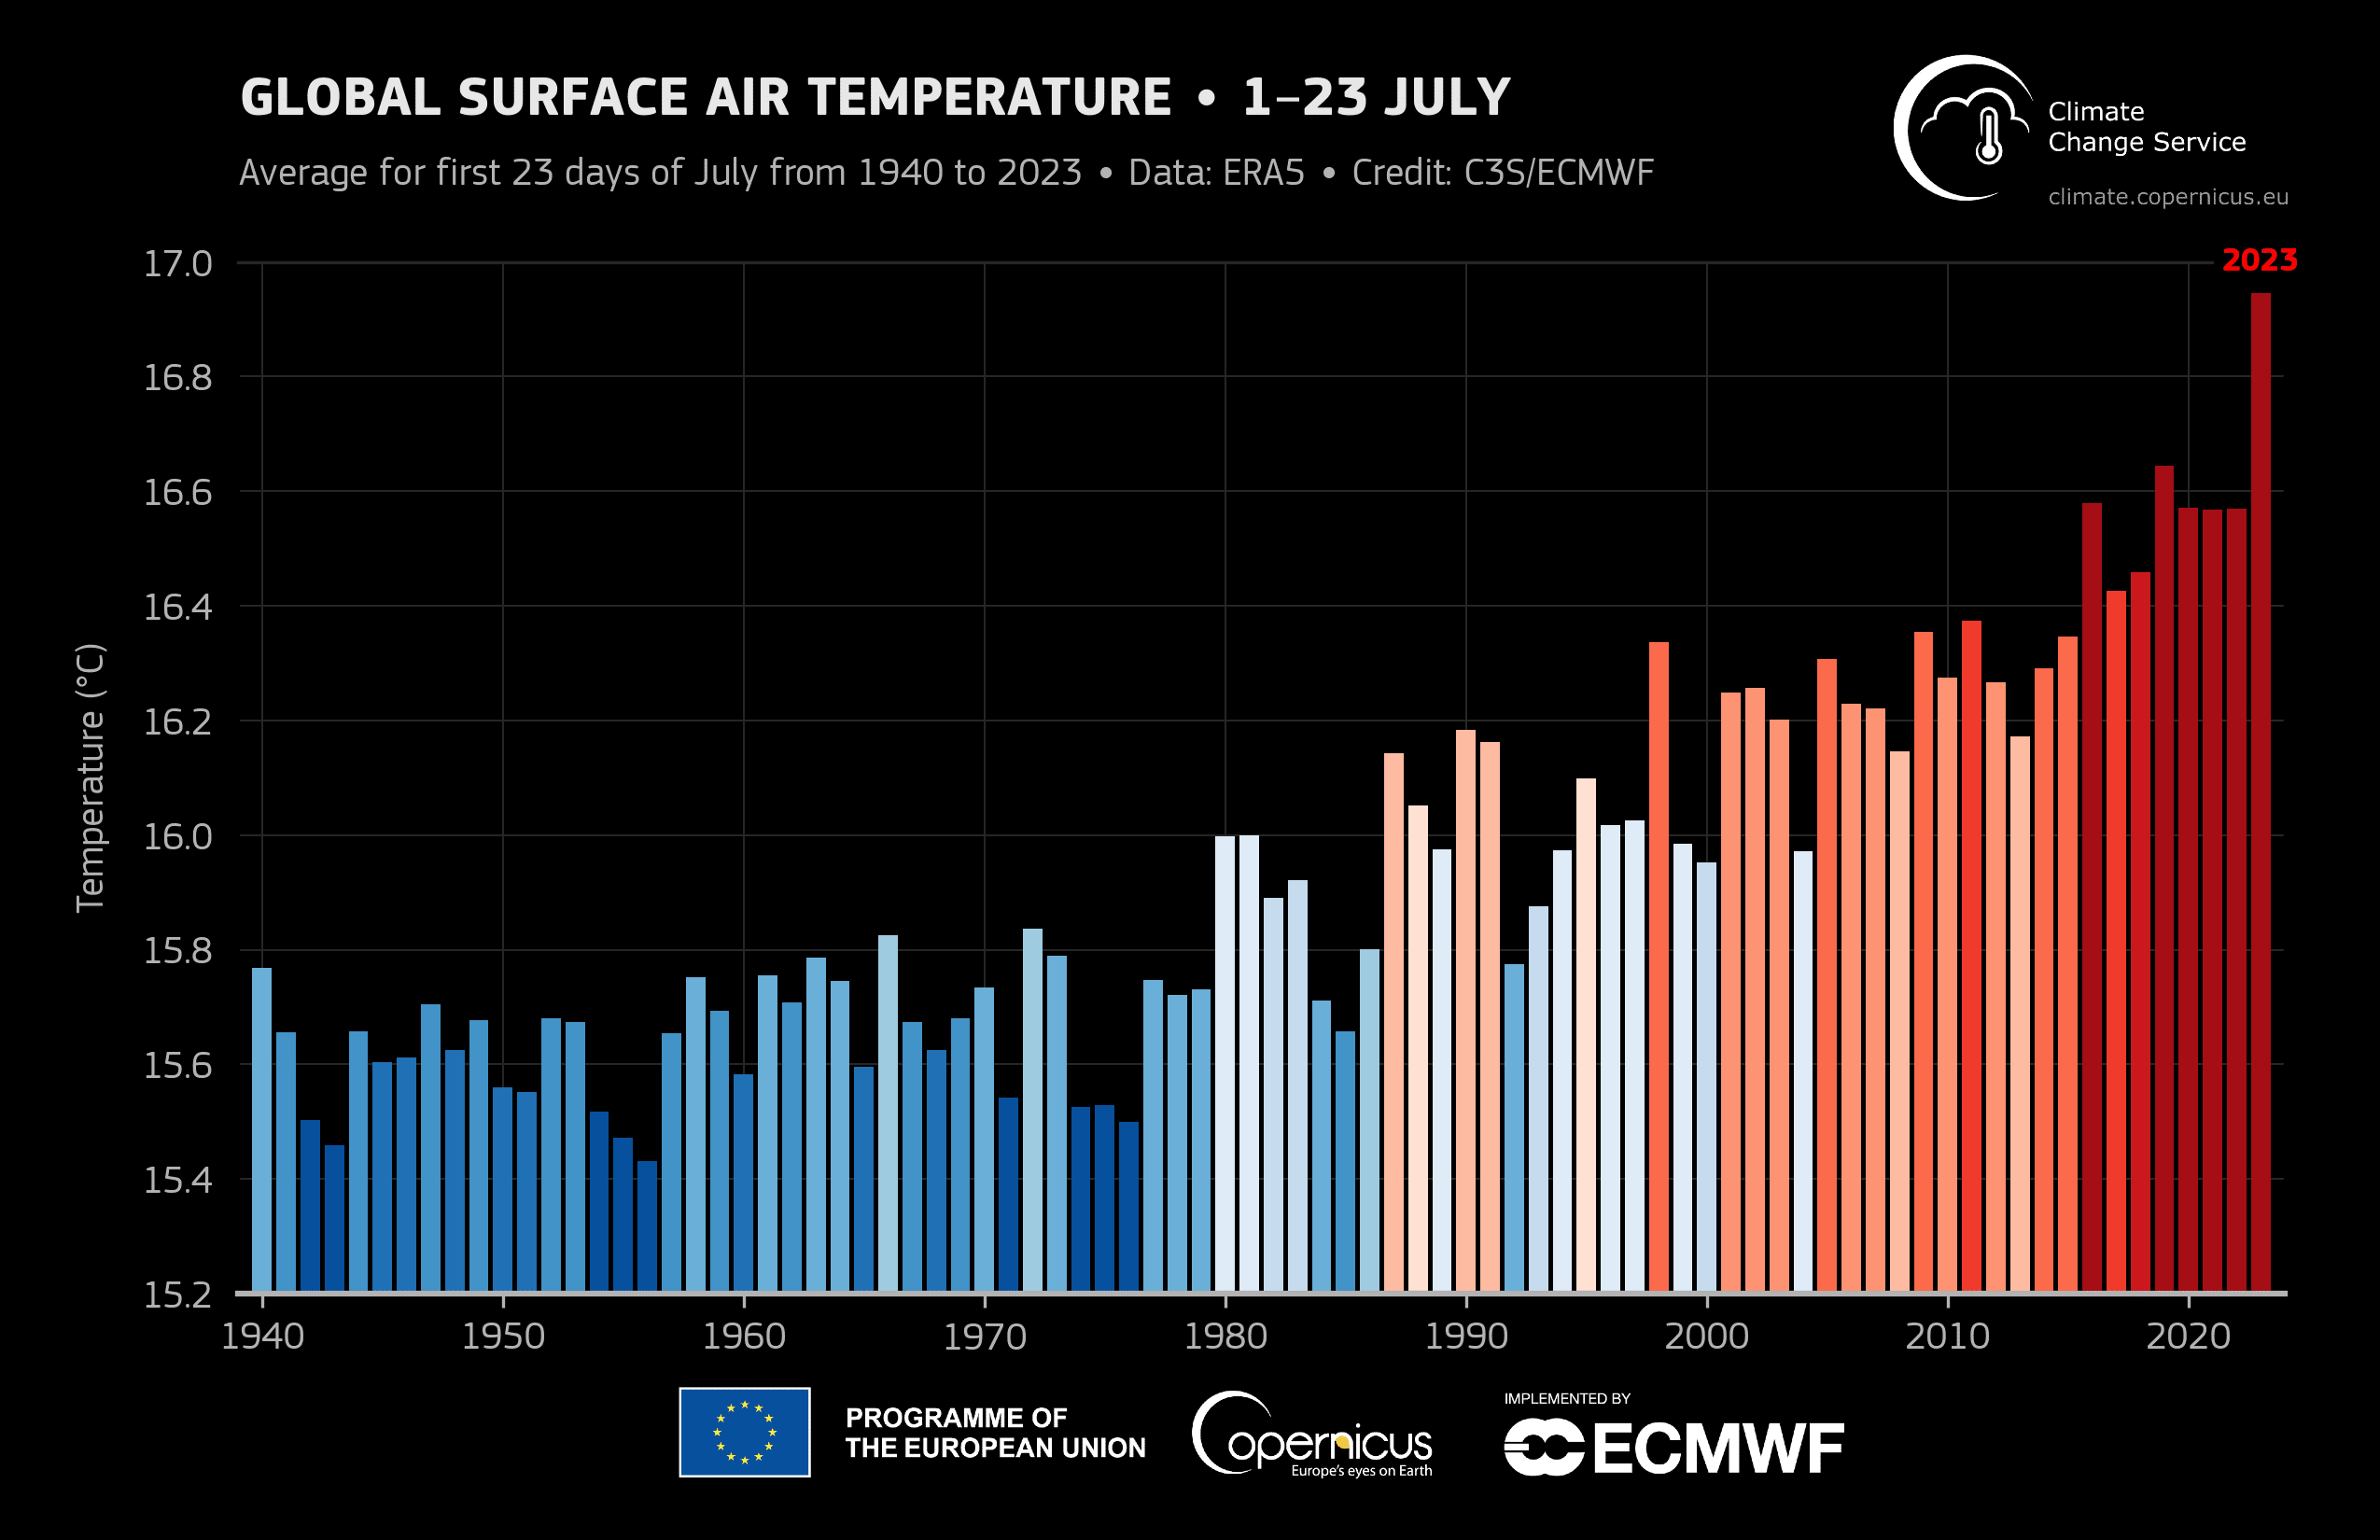 Globally averaged surface air temperature for 1-23 July for all months of July from 1940 to 2023. Shades of blue indicate cooler-than-average years, while red show years that were warmer than average. Data: ERA5. Credit: C3S/ECMWF.